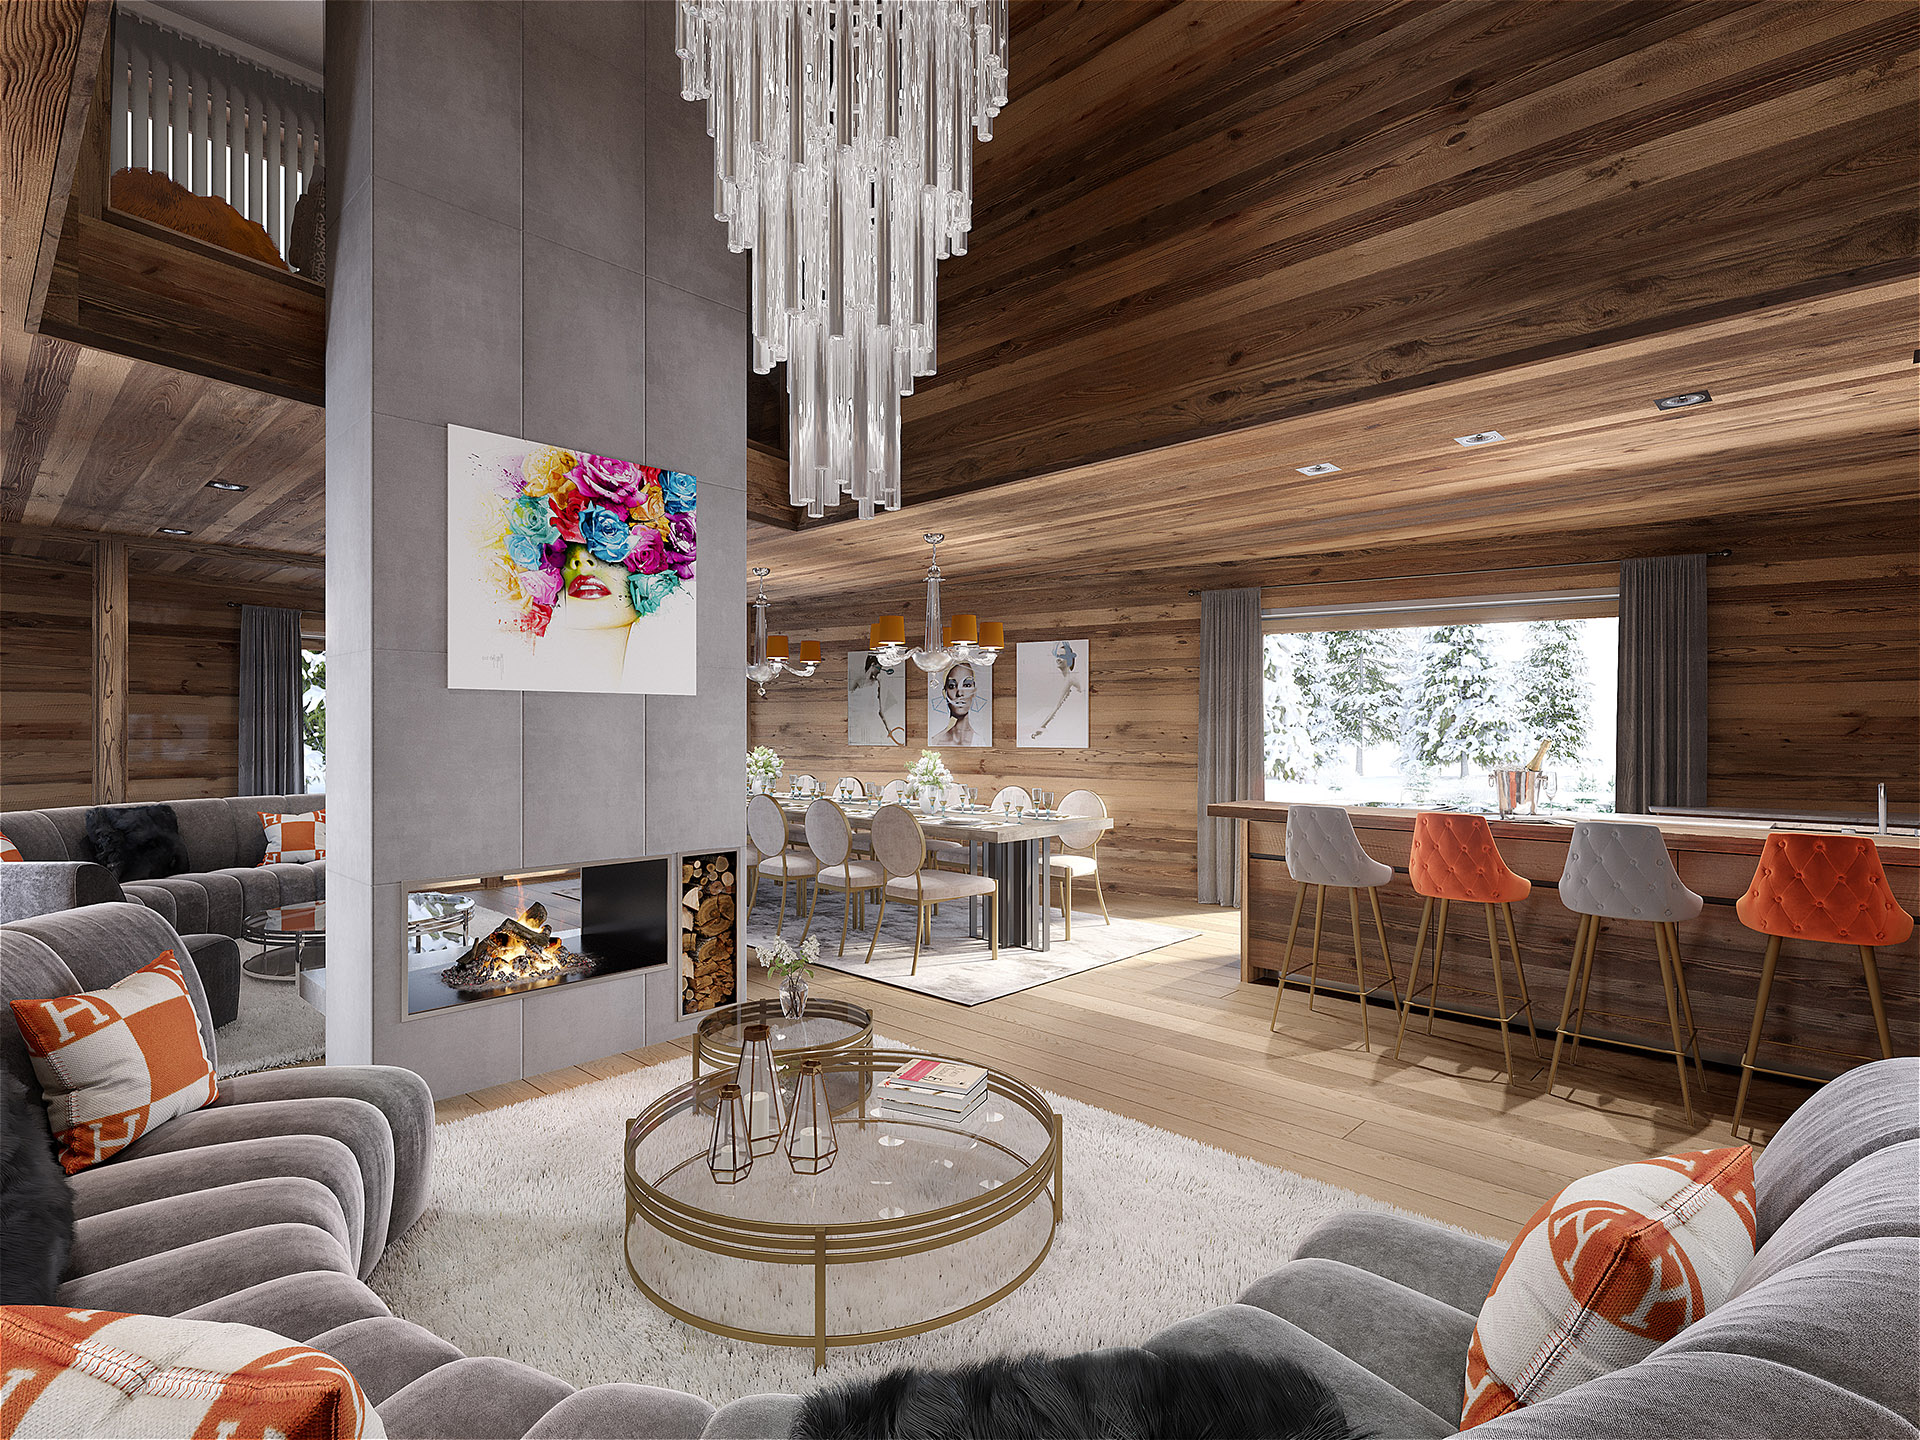 3D image of a luxury living room in a mountain chalet